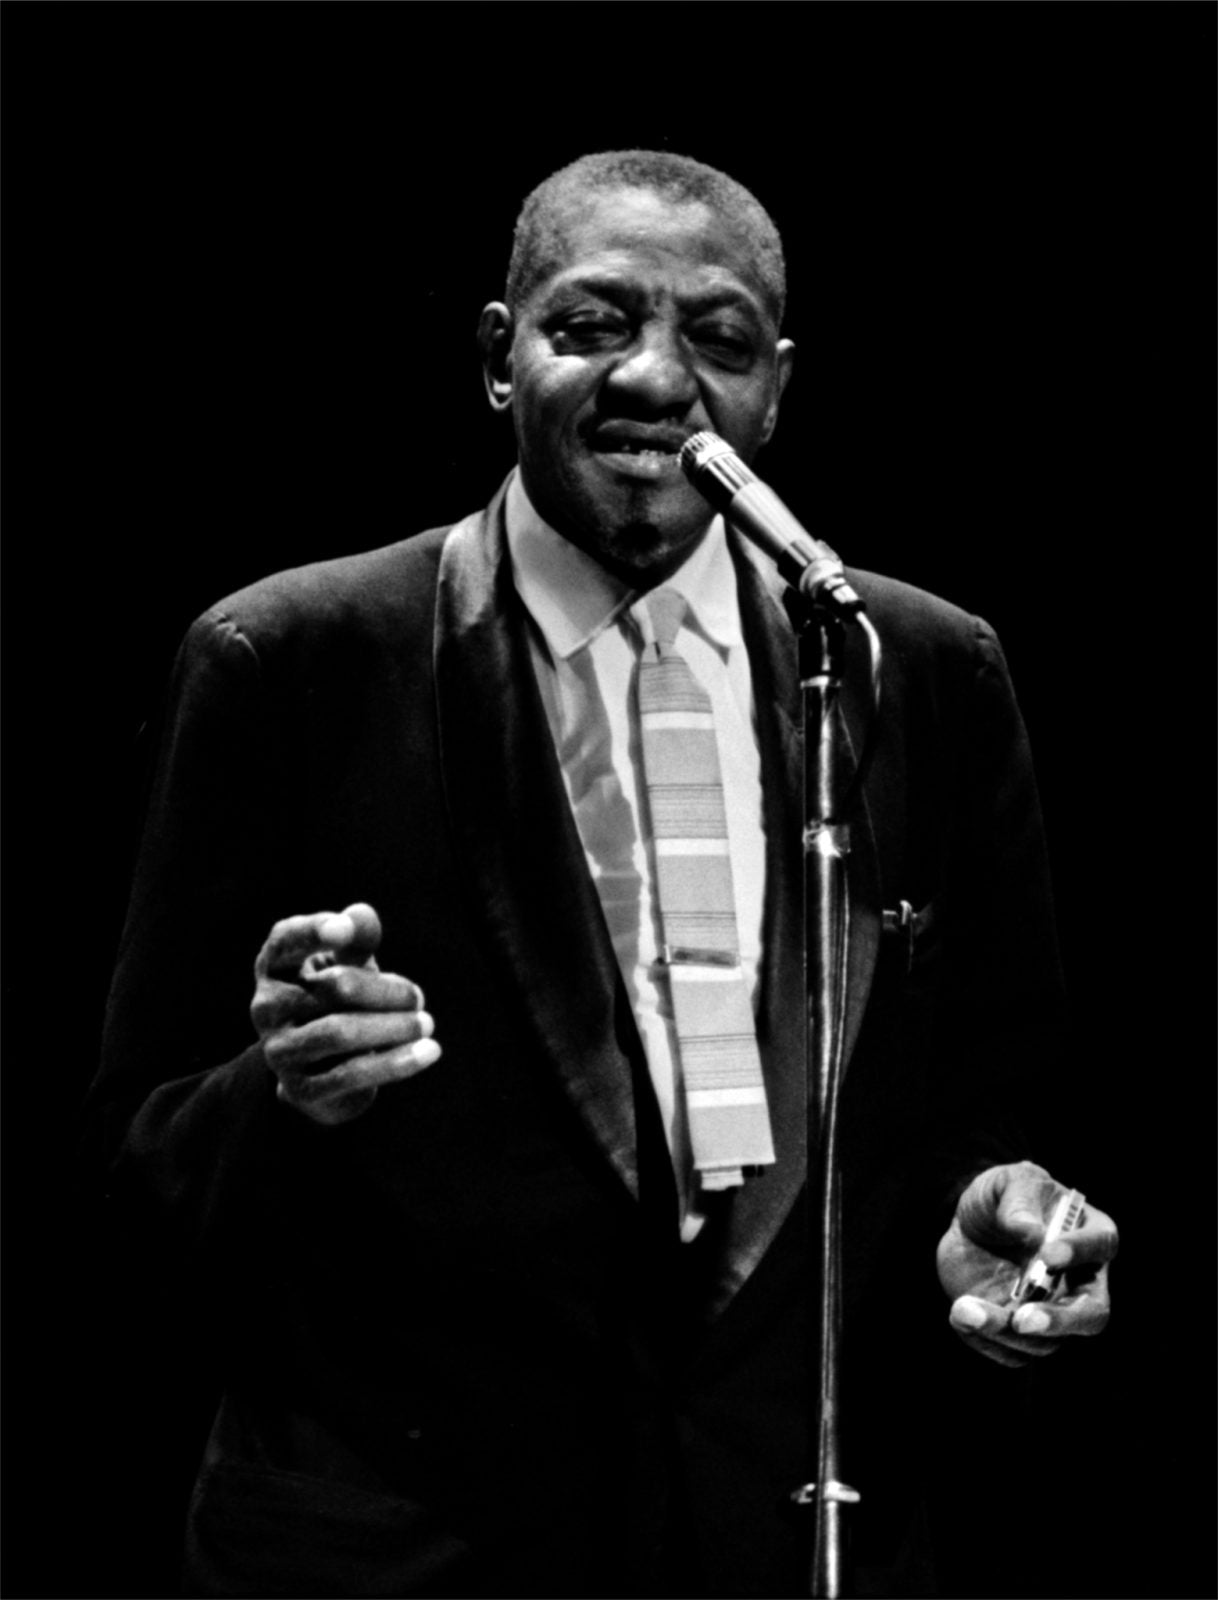 Sonny Boy Williamson half way through singing with his hands floating 